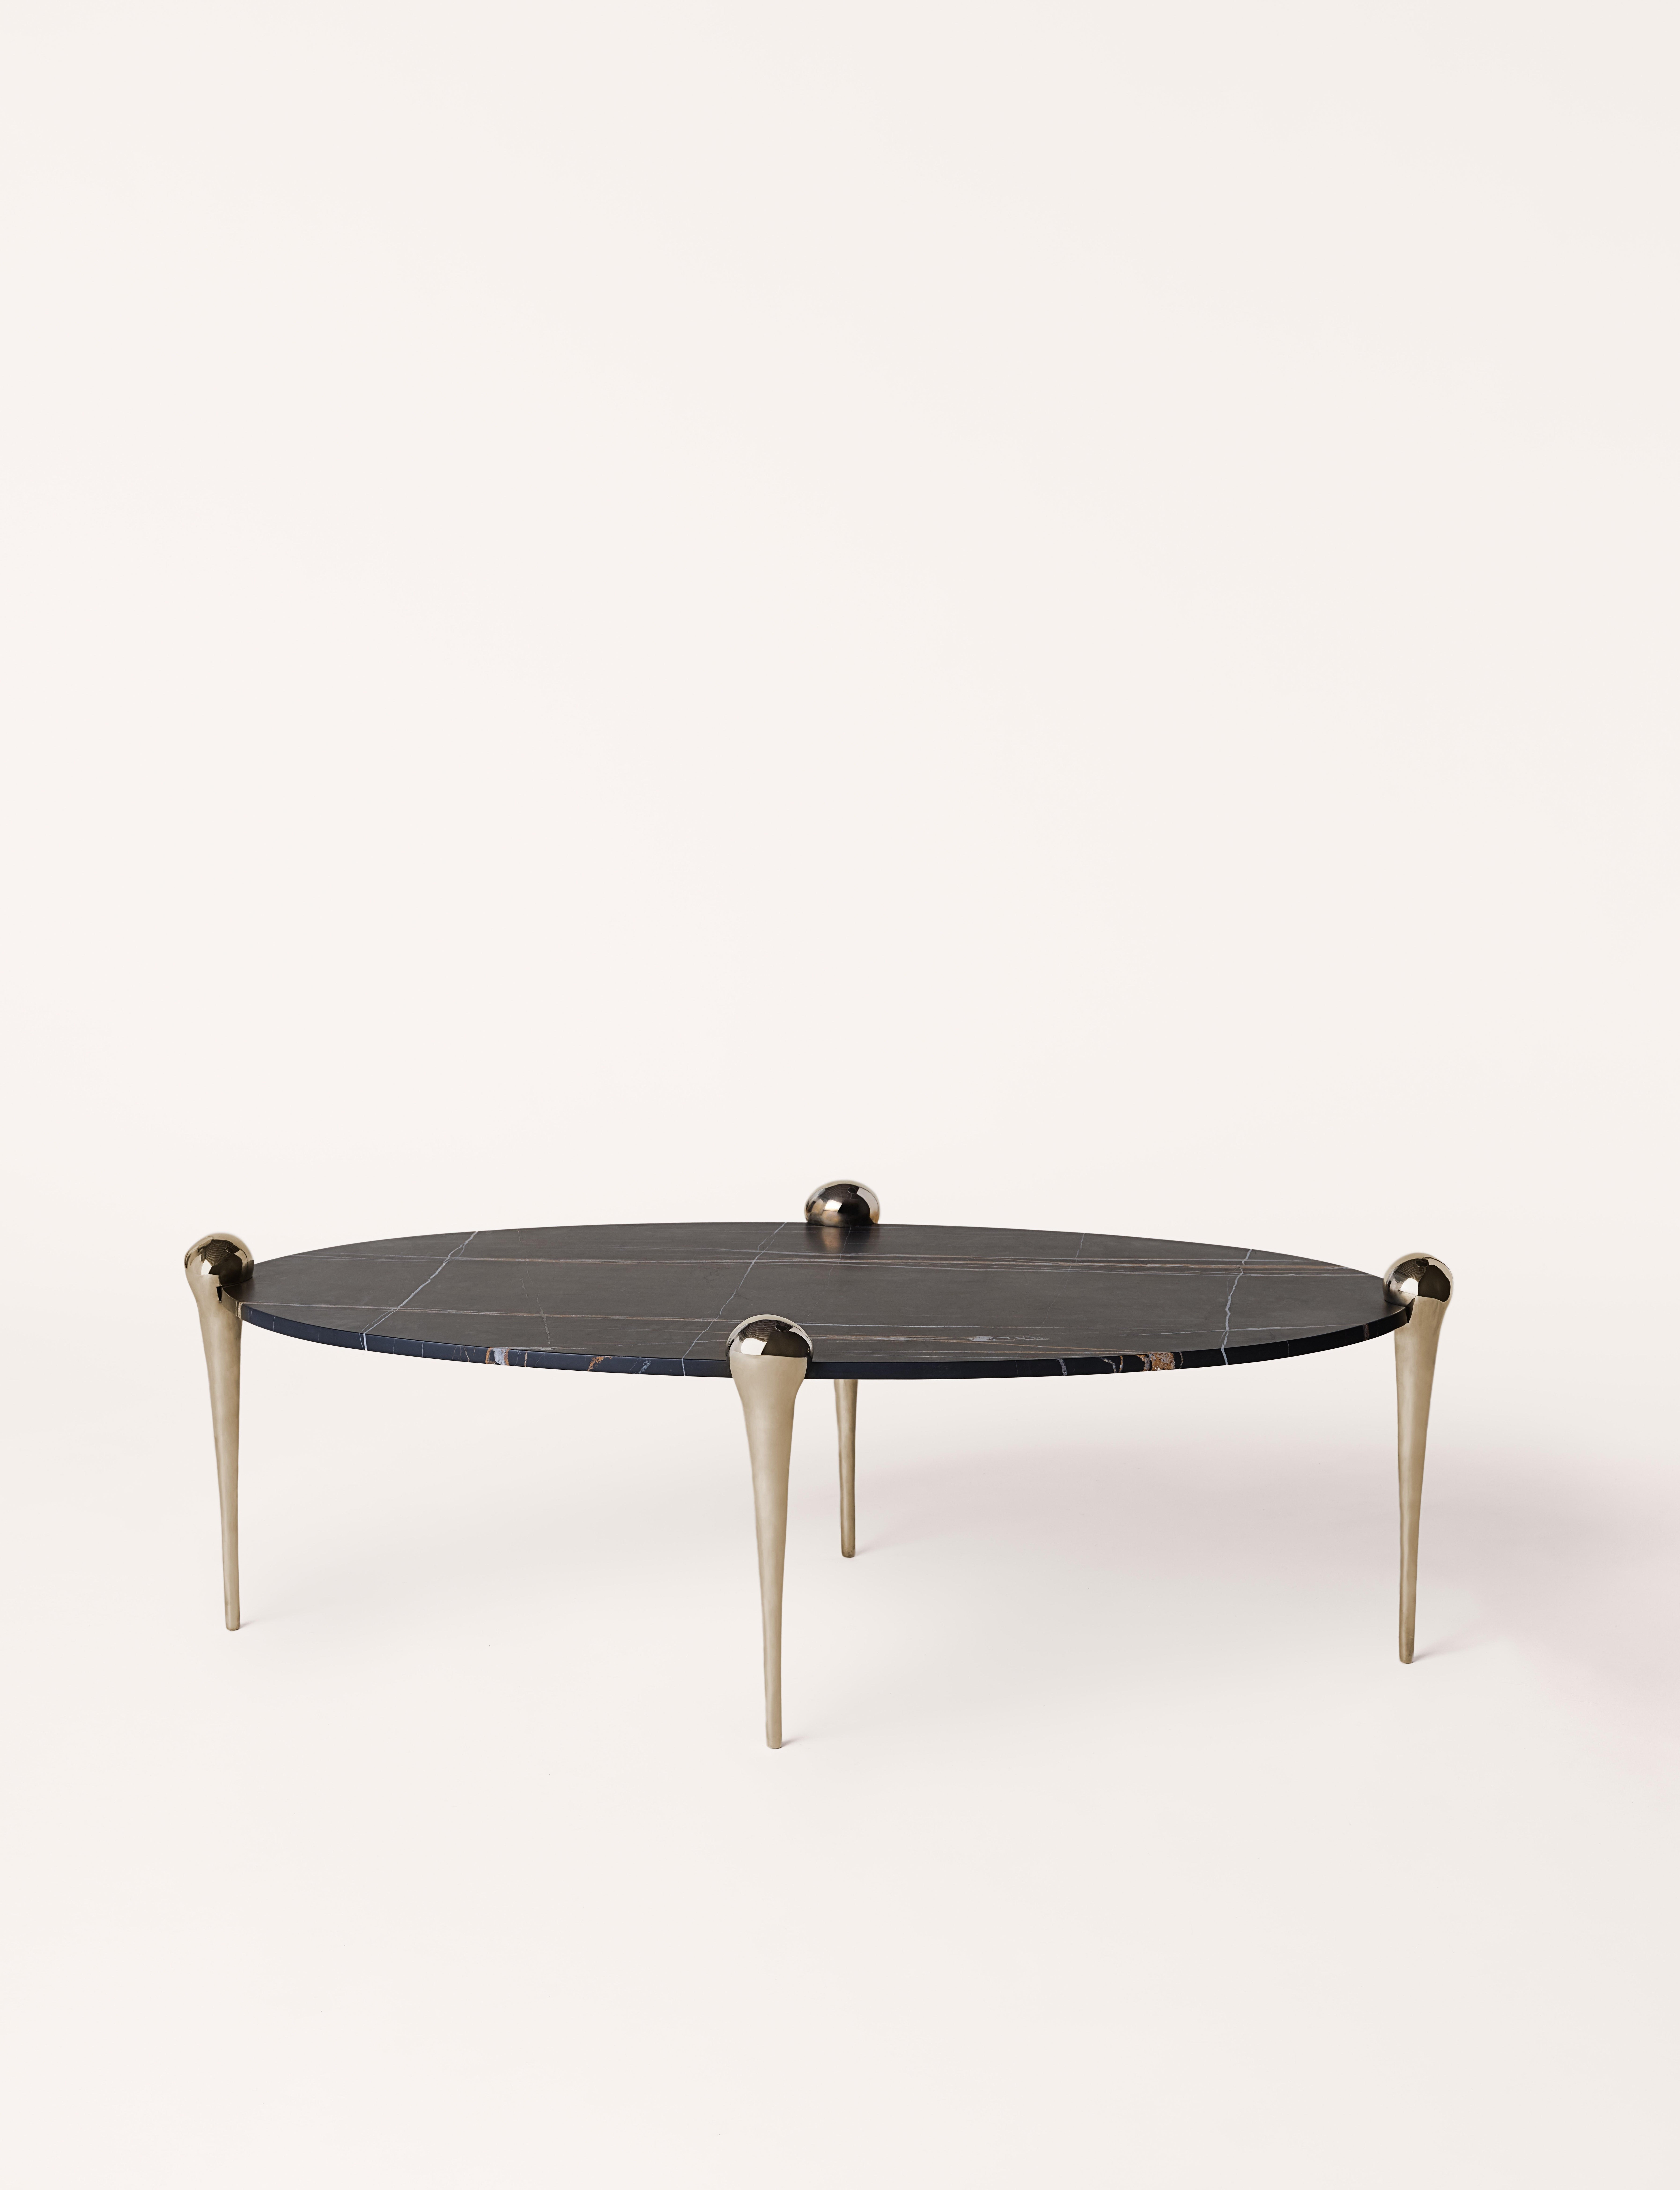 The Petra coffee table features an oval honed & enhanced marble table top and four sculptural polished bronze legs. The bronze legs are inspired by the strong yet elegant hind legs of a camel, and are sand-cast at a local Pennsylvania foundry from a